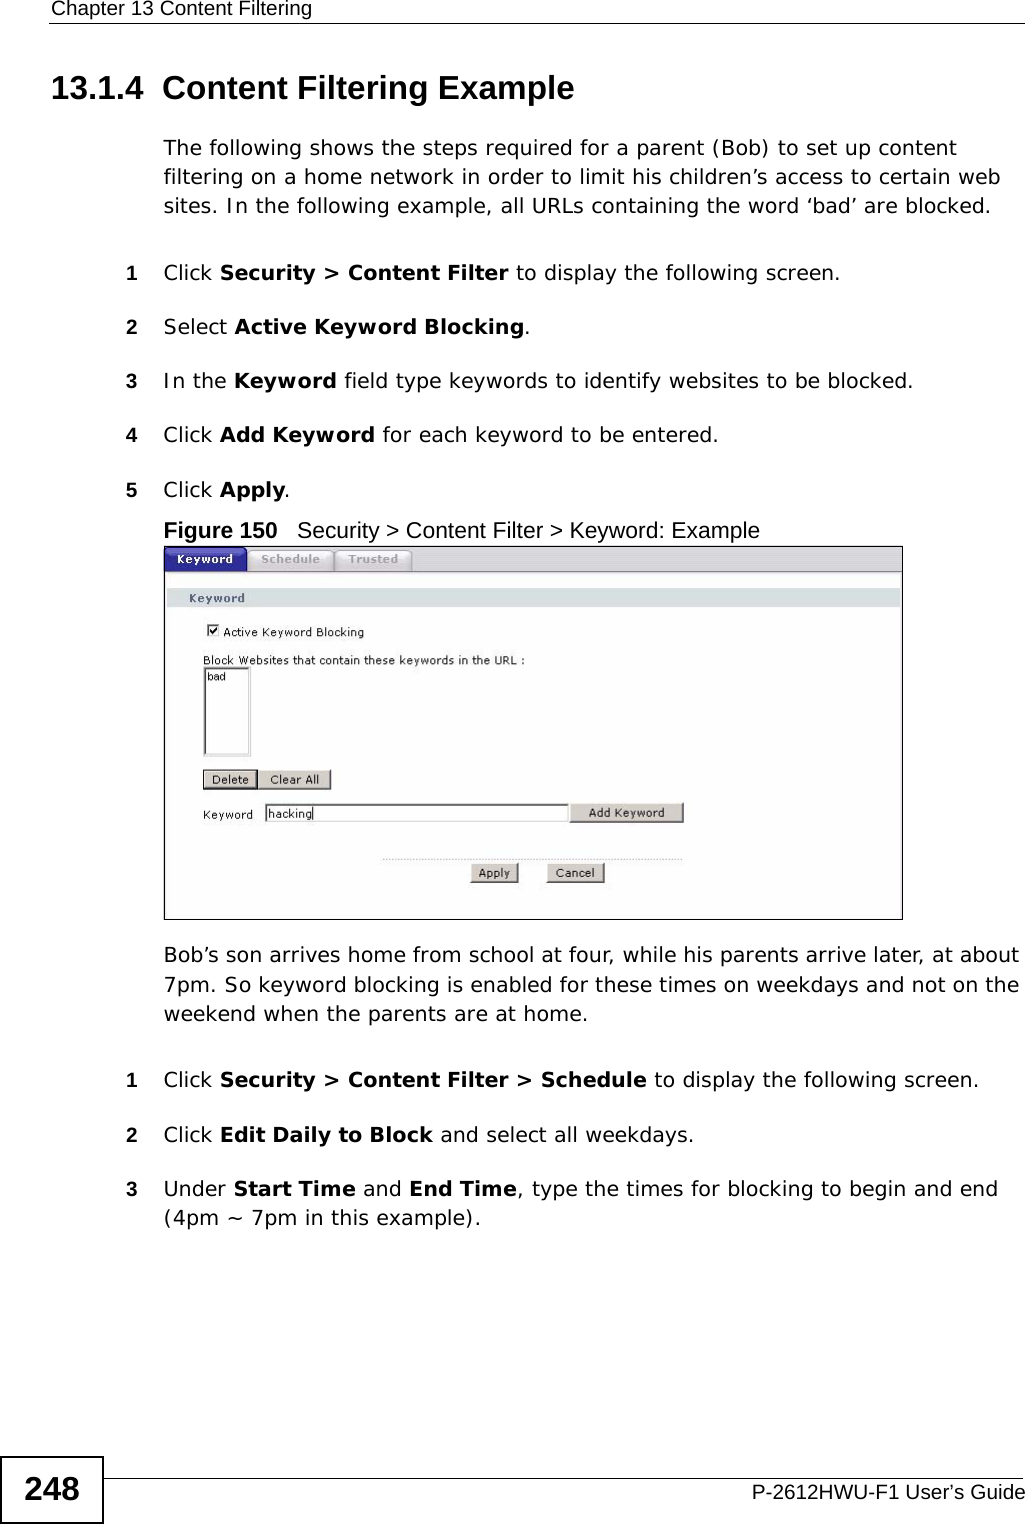 Chapter 13 Content FilteringP-2612HWU-F1 User’s Guide24813.1.4  Content Filtering ExampleThe following shows the steps required for a parent (Bob) to set up content filtering on a home network in order to limit his children’s access to certain web sites. In the following example, all URLs containing the word ‘bad’ are blocked.1Click Security &gt; Content Filter to display the following screen.2Select Active Keyword Blocking.3In the Keyword field type keywords to identify websites to be blocked. 4Click Add Keyword for each keyword to be entered.5Click Apply.Figure 150   Security &gt; Content Filter &gt; Keyword: ExampleBob’s son arrives home from school at four, while his parents arrive later, at about 7pm. So keyword blocking is enabled for these times on weekdays and not on the weekend when the parents are at home.1Click Security &gt; Content Filter &gt; Schedule to display the following screen.2Click Edit Daily to Block and select all weekdays.3Under Start Time and End Time, type the times for blocking to begin and end (4pm ~ 7pm in this example).